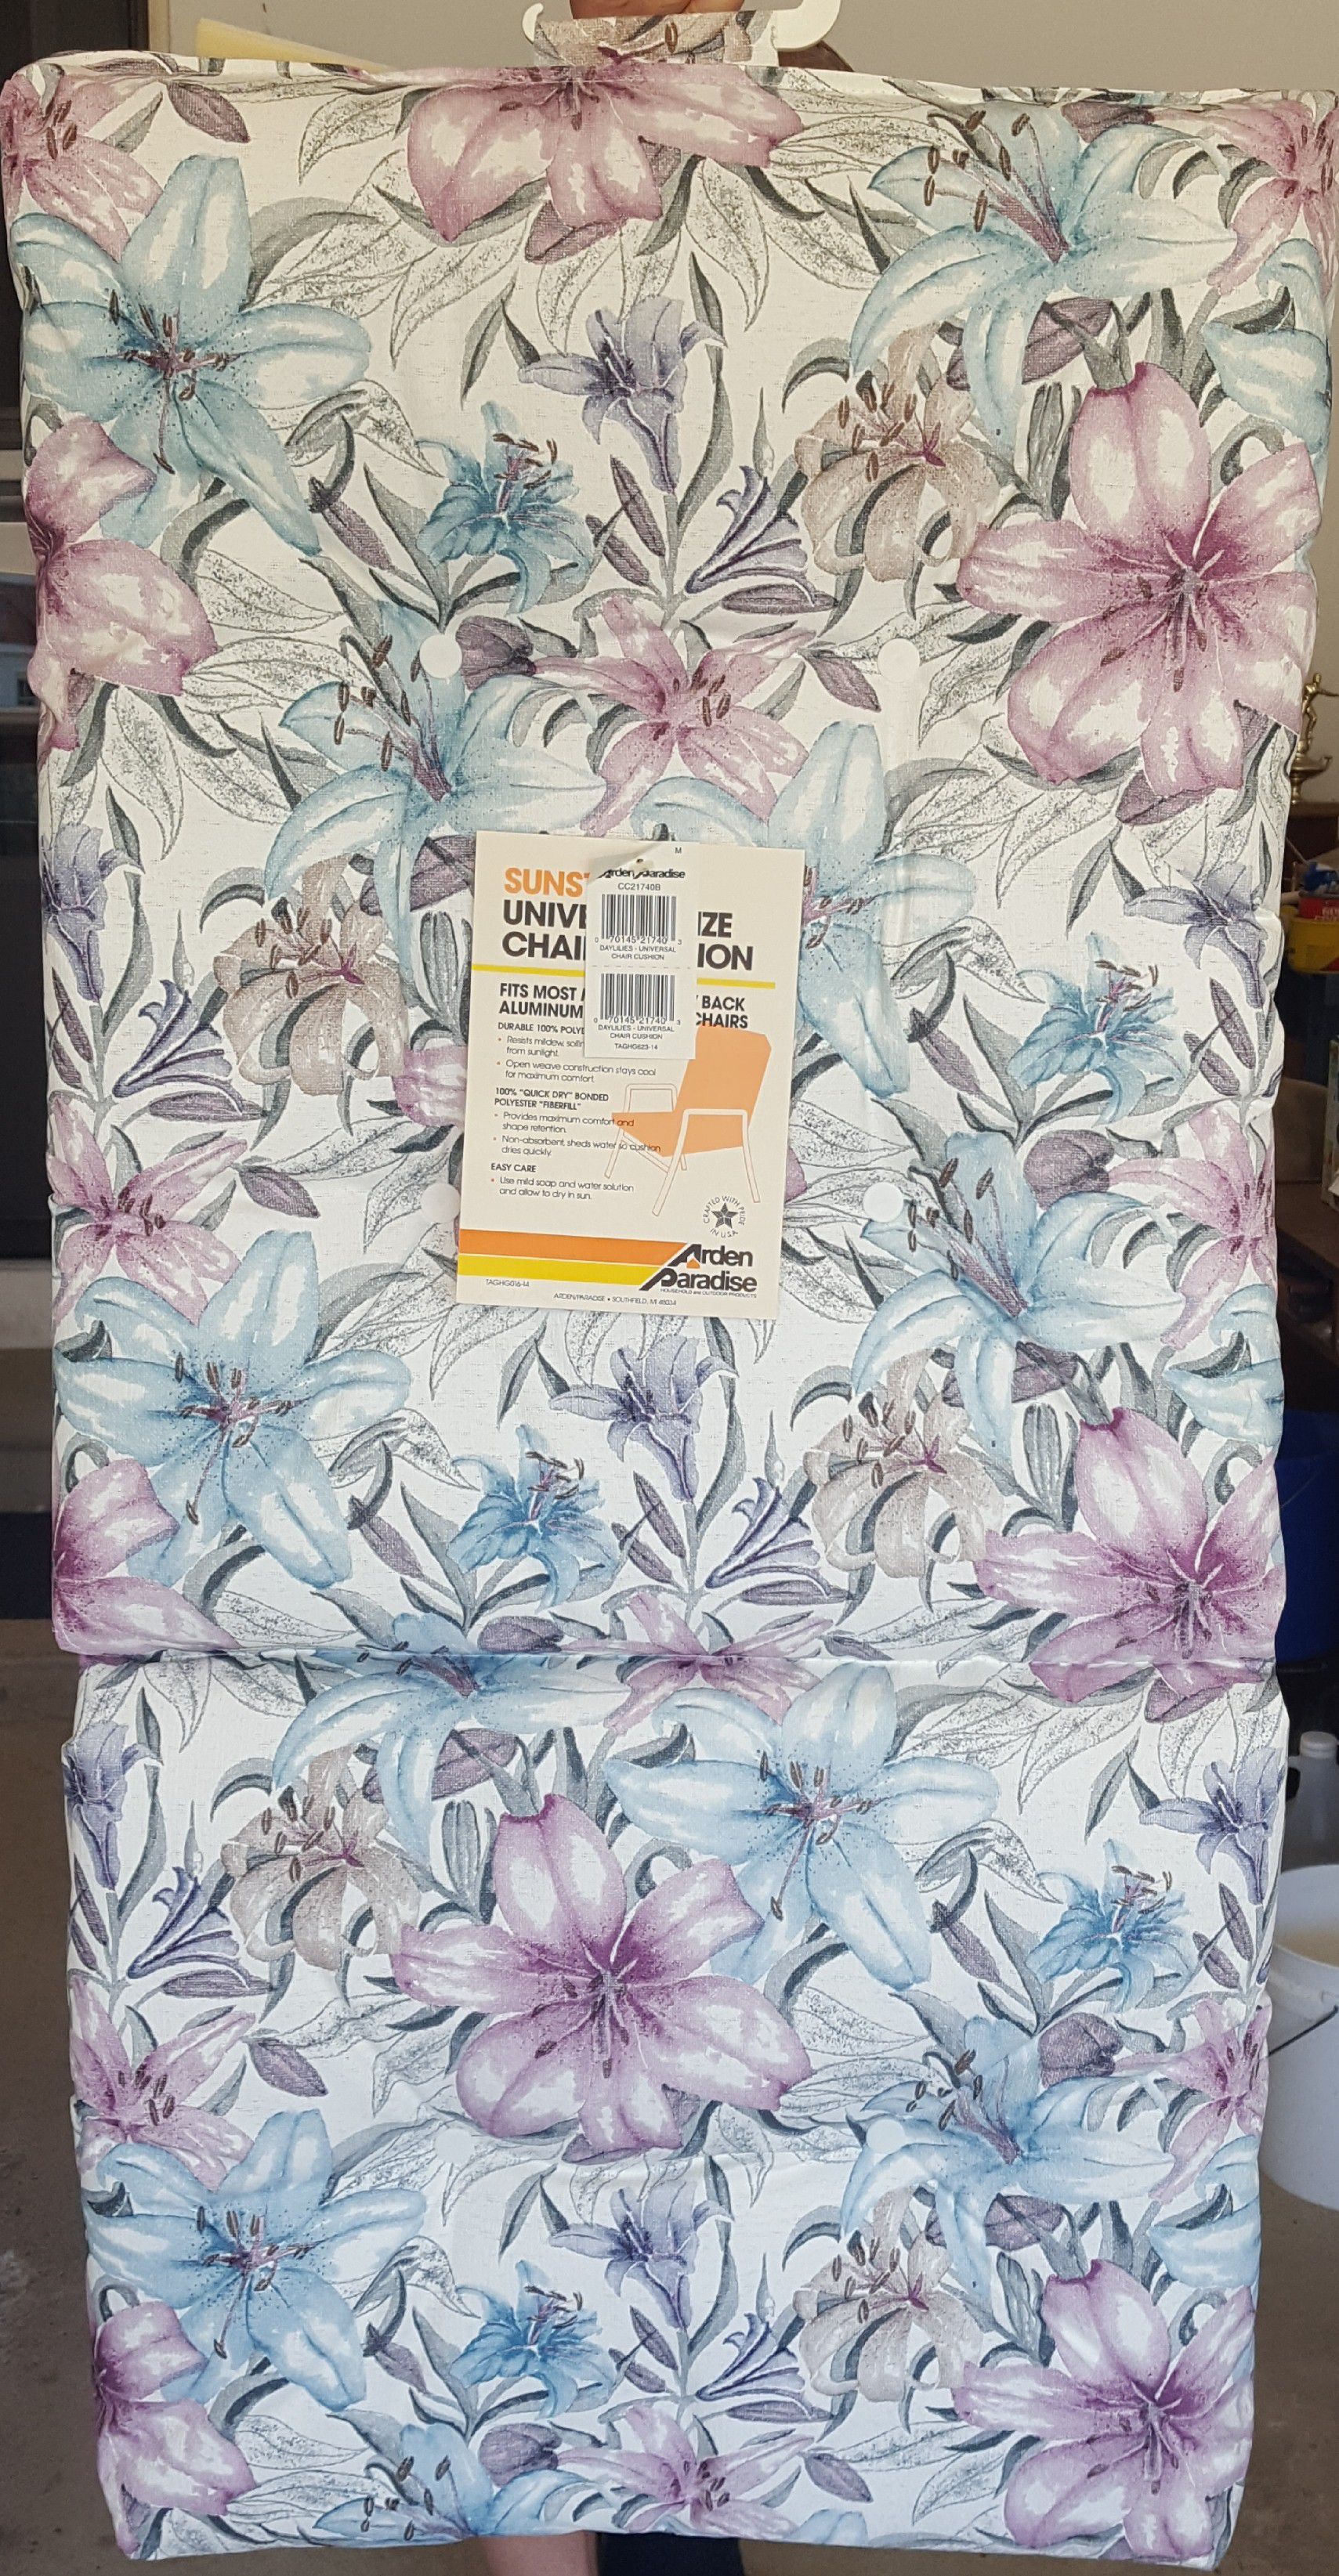 Arden Paradise Chair Cushions 42"x21" Set of Two for $20🌞